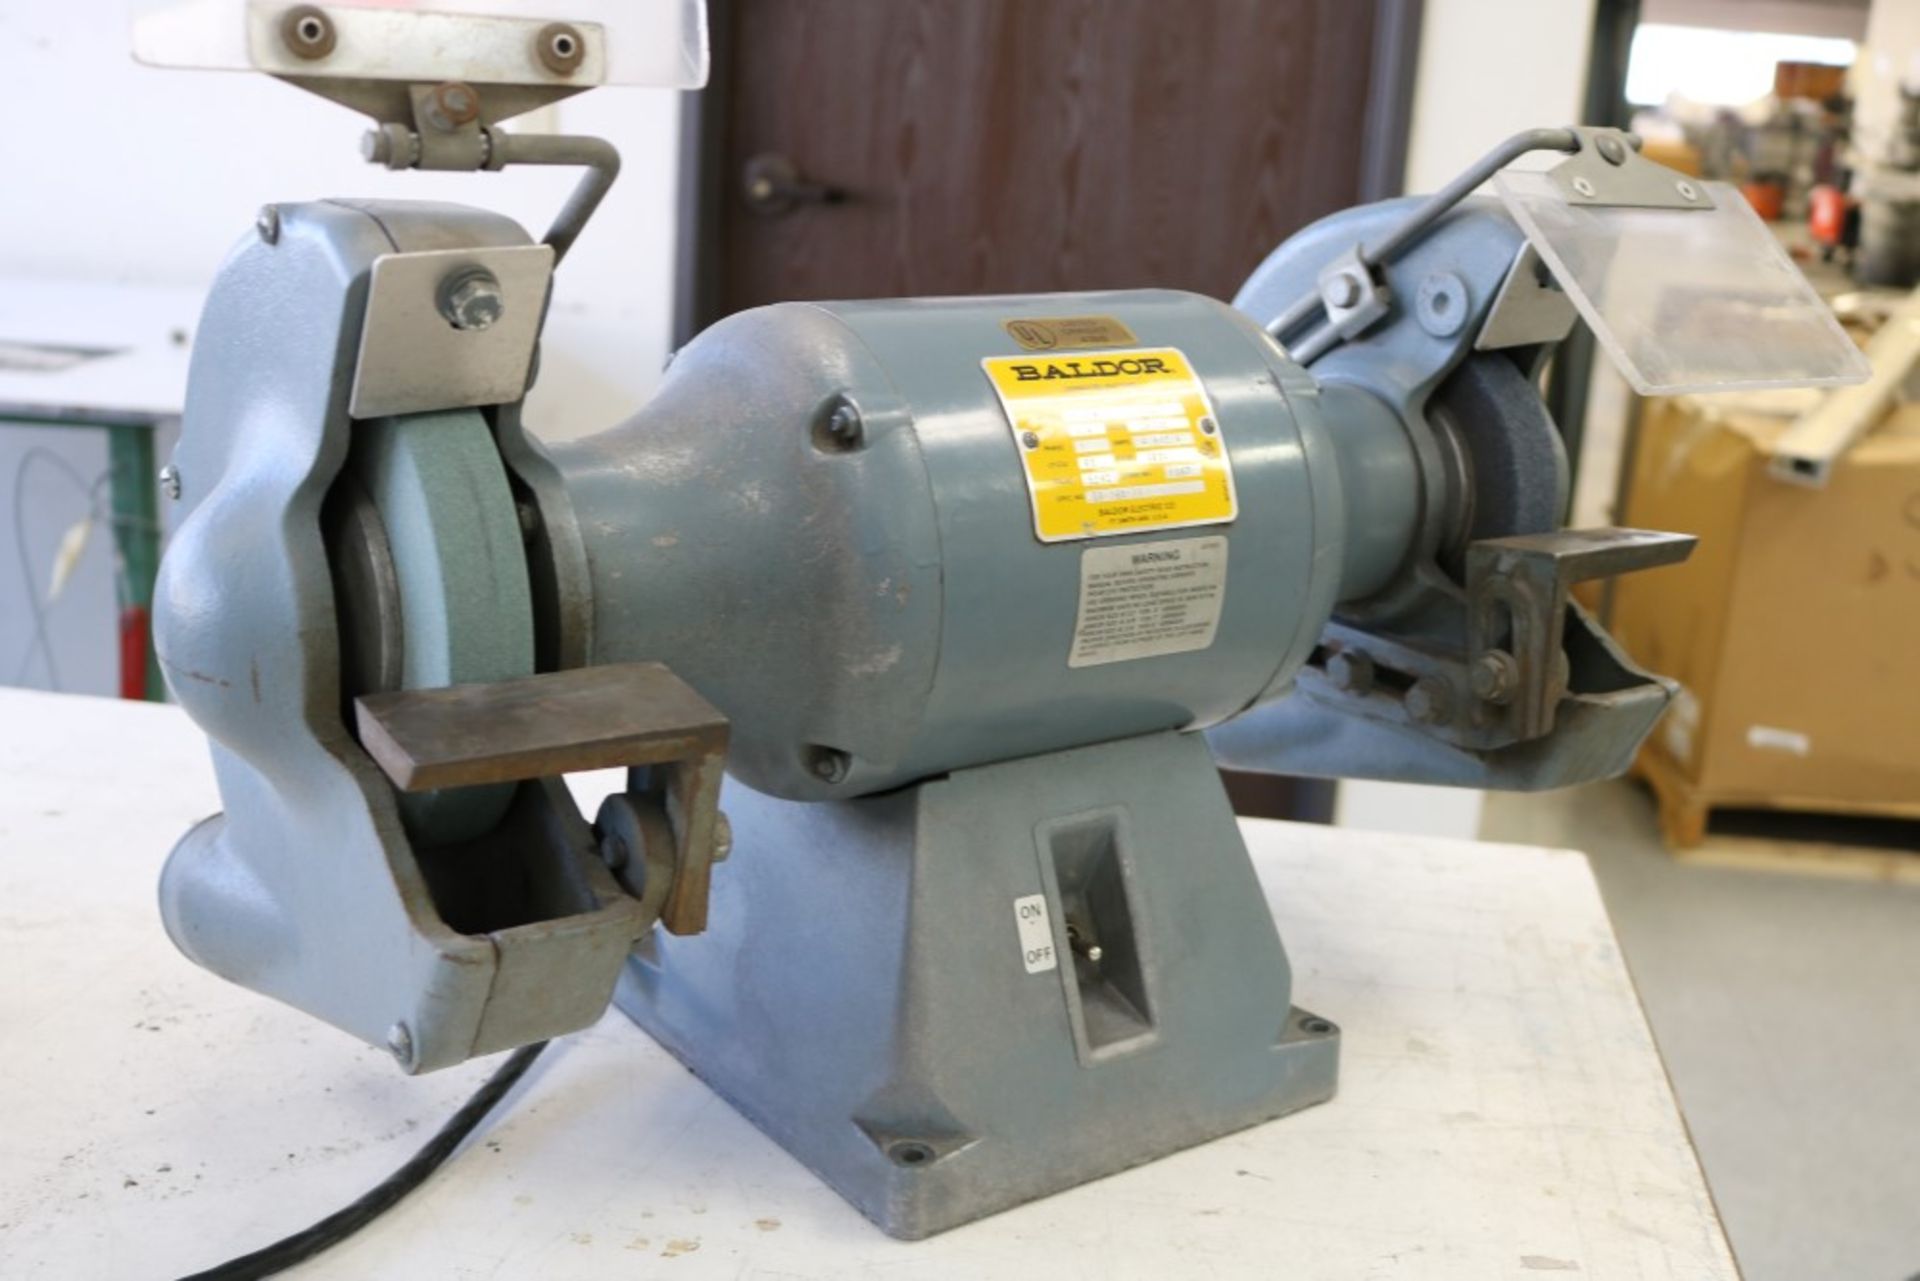 Baldor Grinder/Buffer 3/4 HP, 3600 RPM, with Grinding Wheels Attached - Image 3 of 5